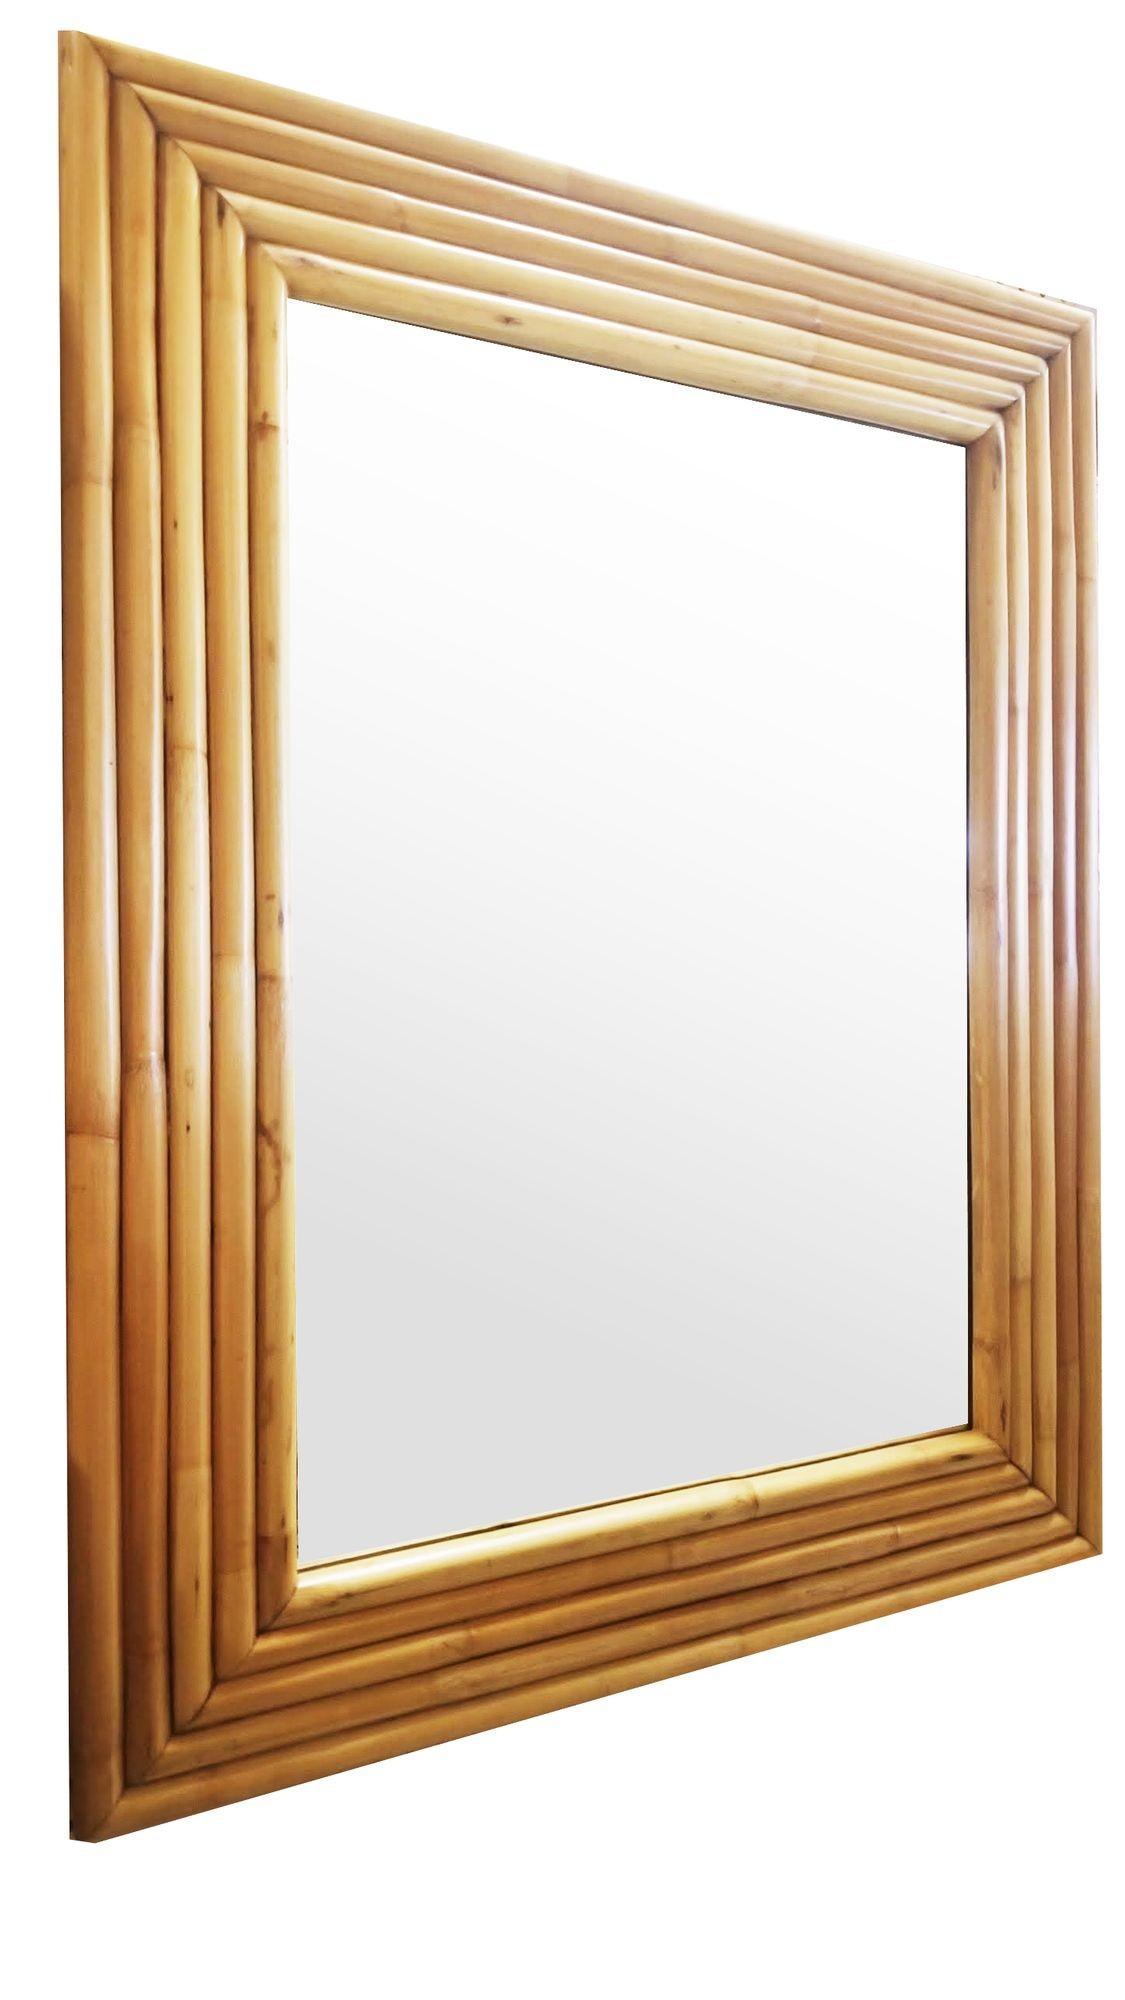 Original 1948 new-stock rattan frame from the unused stock of Tropical Sun Rattan Company of Pasadena. The Mirror features 7-strand stacked rattan frame with a 28